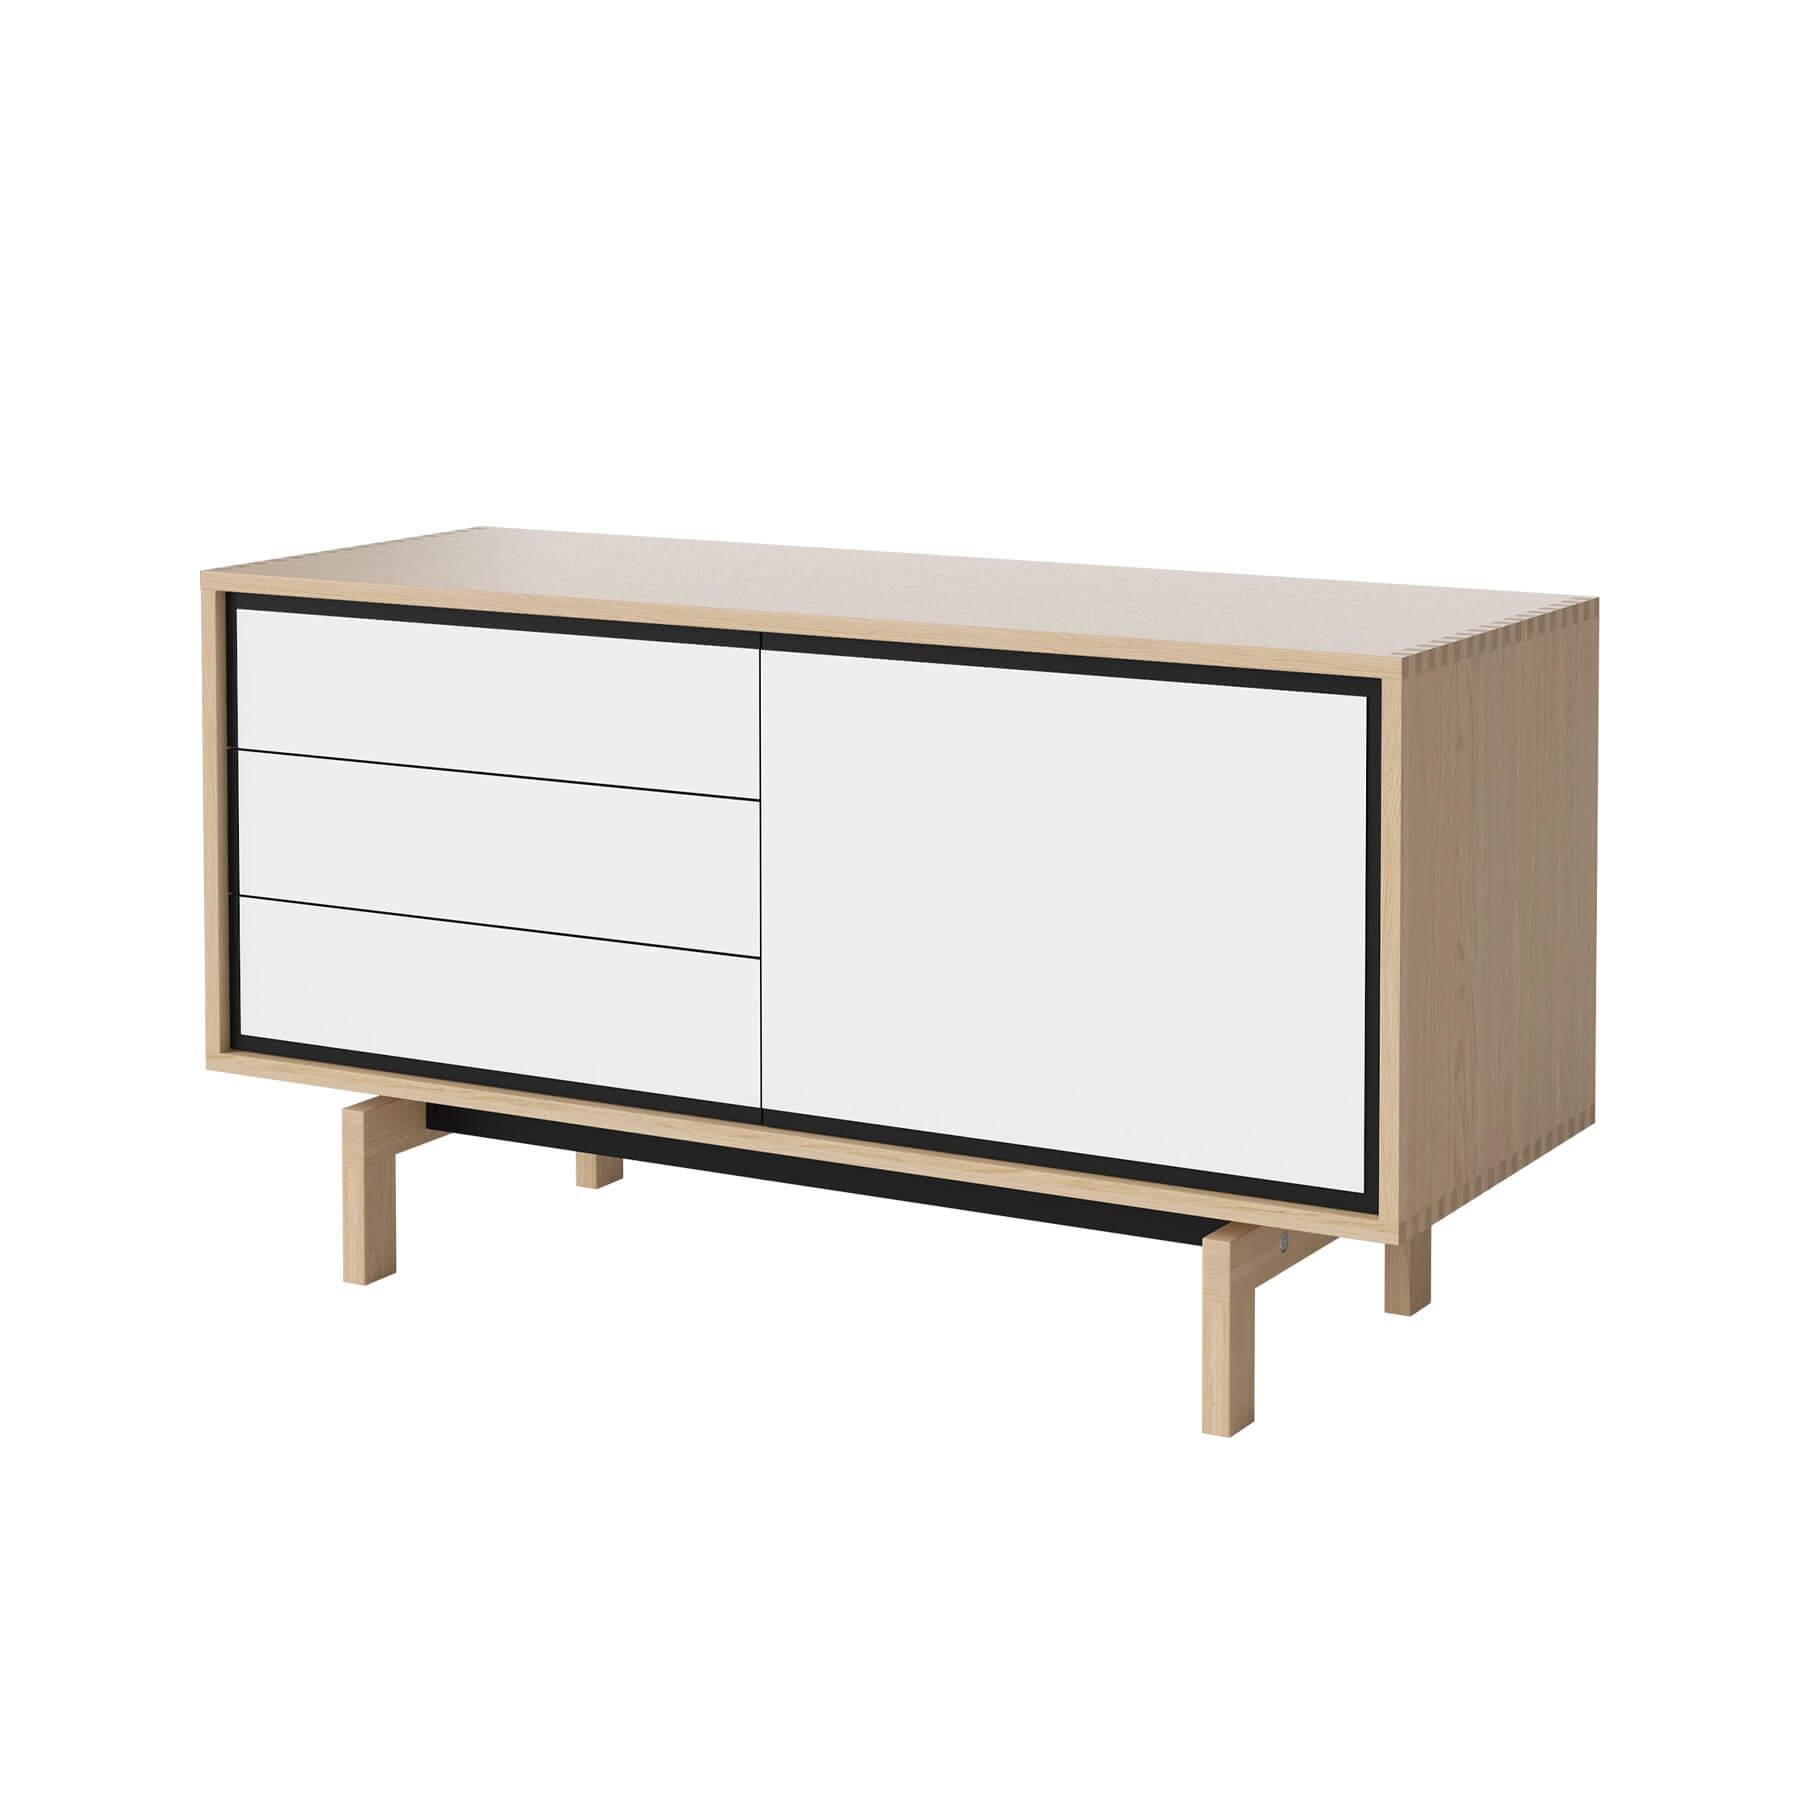 Bolia Floow Sideboard Small White Oiled Oak With White Laminate Light Wood Designer Furniture From Holloways Of Ludlow